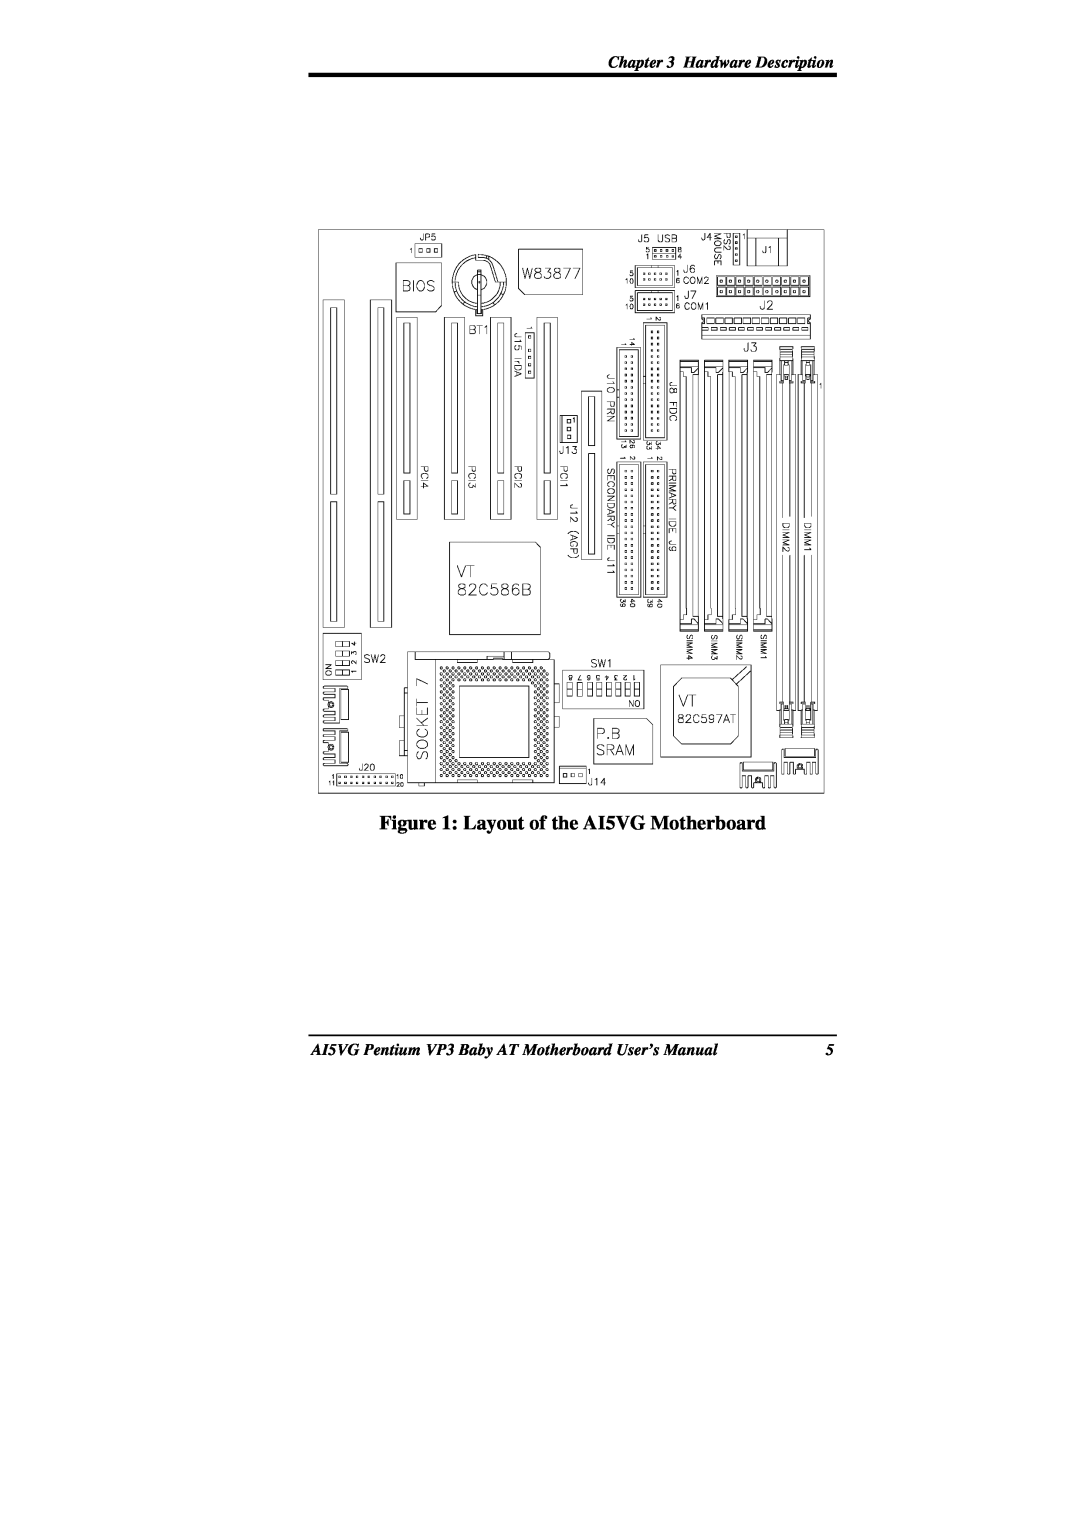 Intel user manual Layout of the AI5VG Motherboard, Hardware Description 